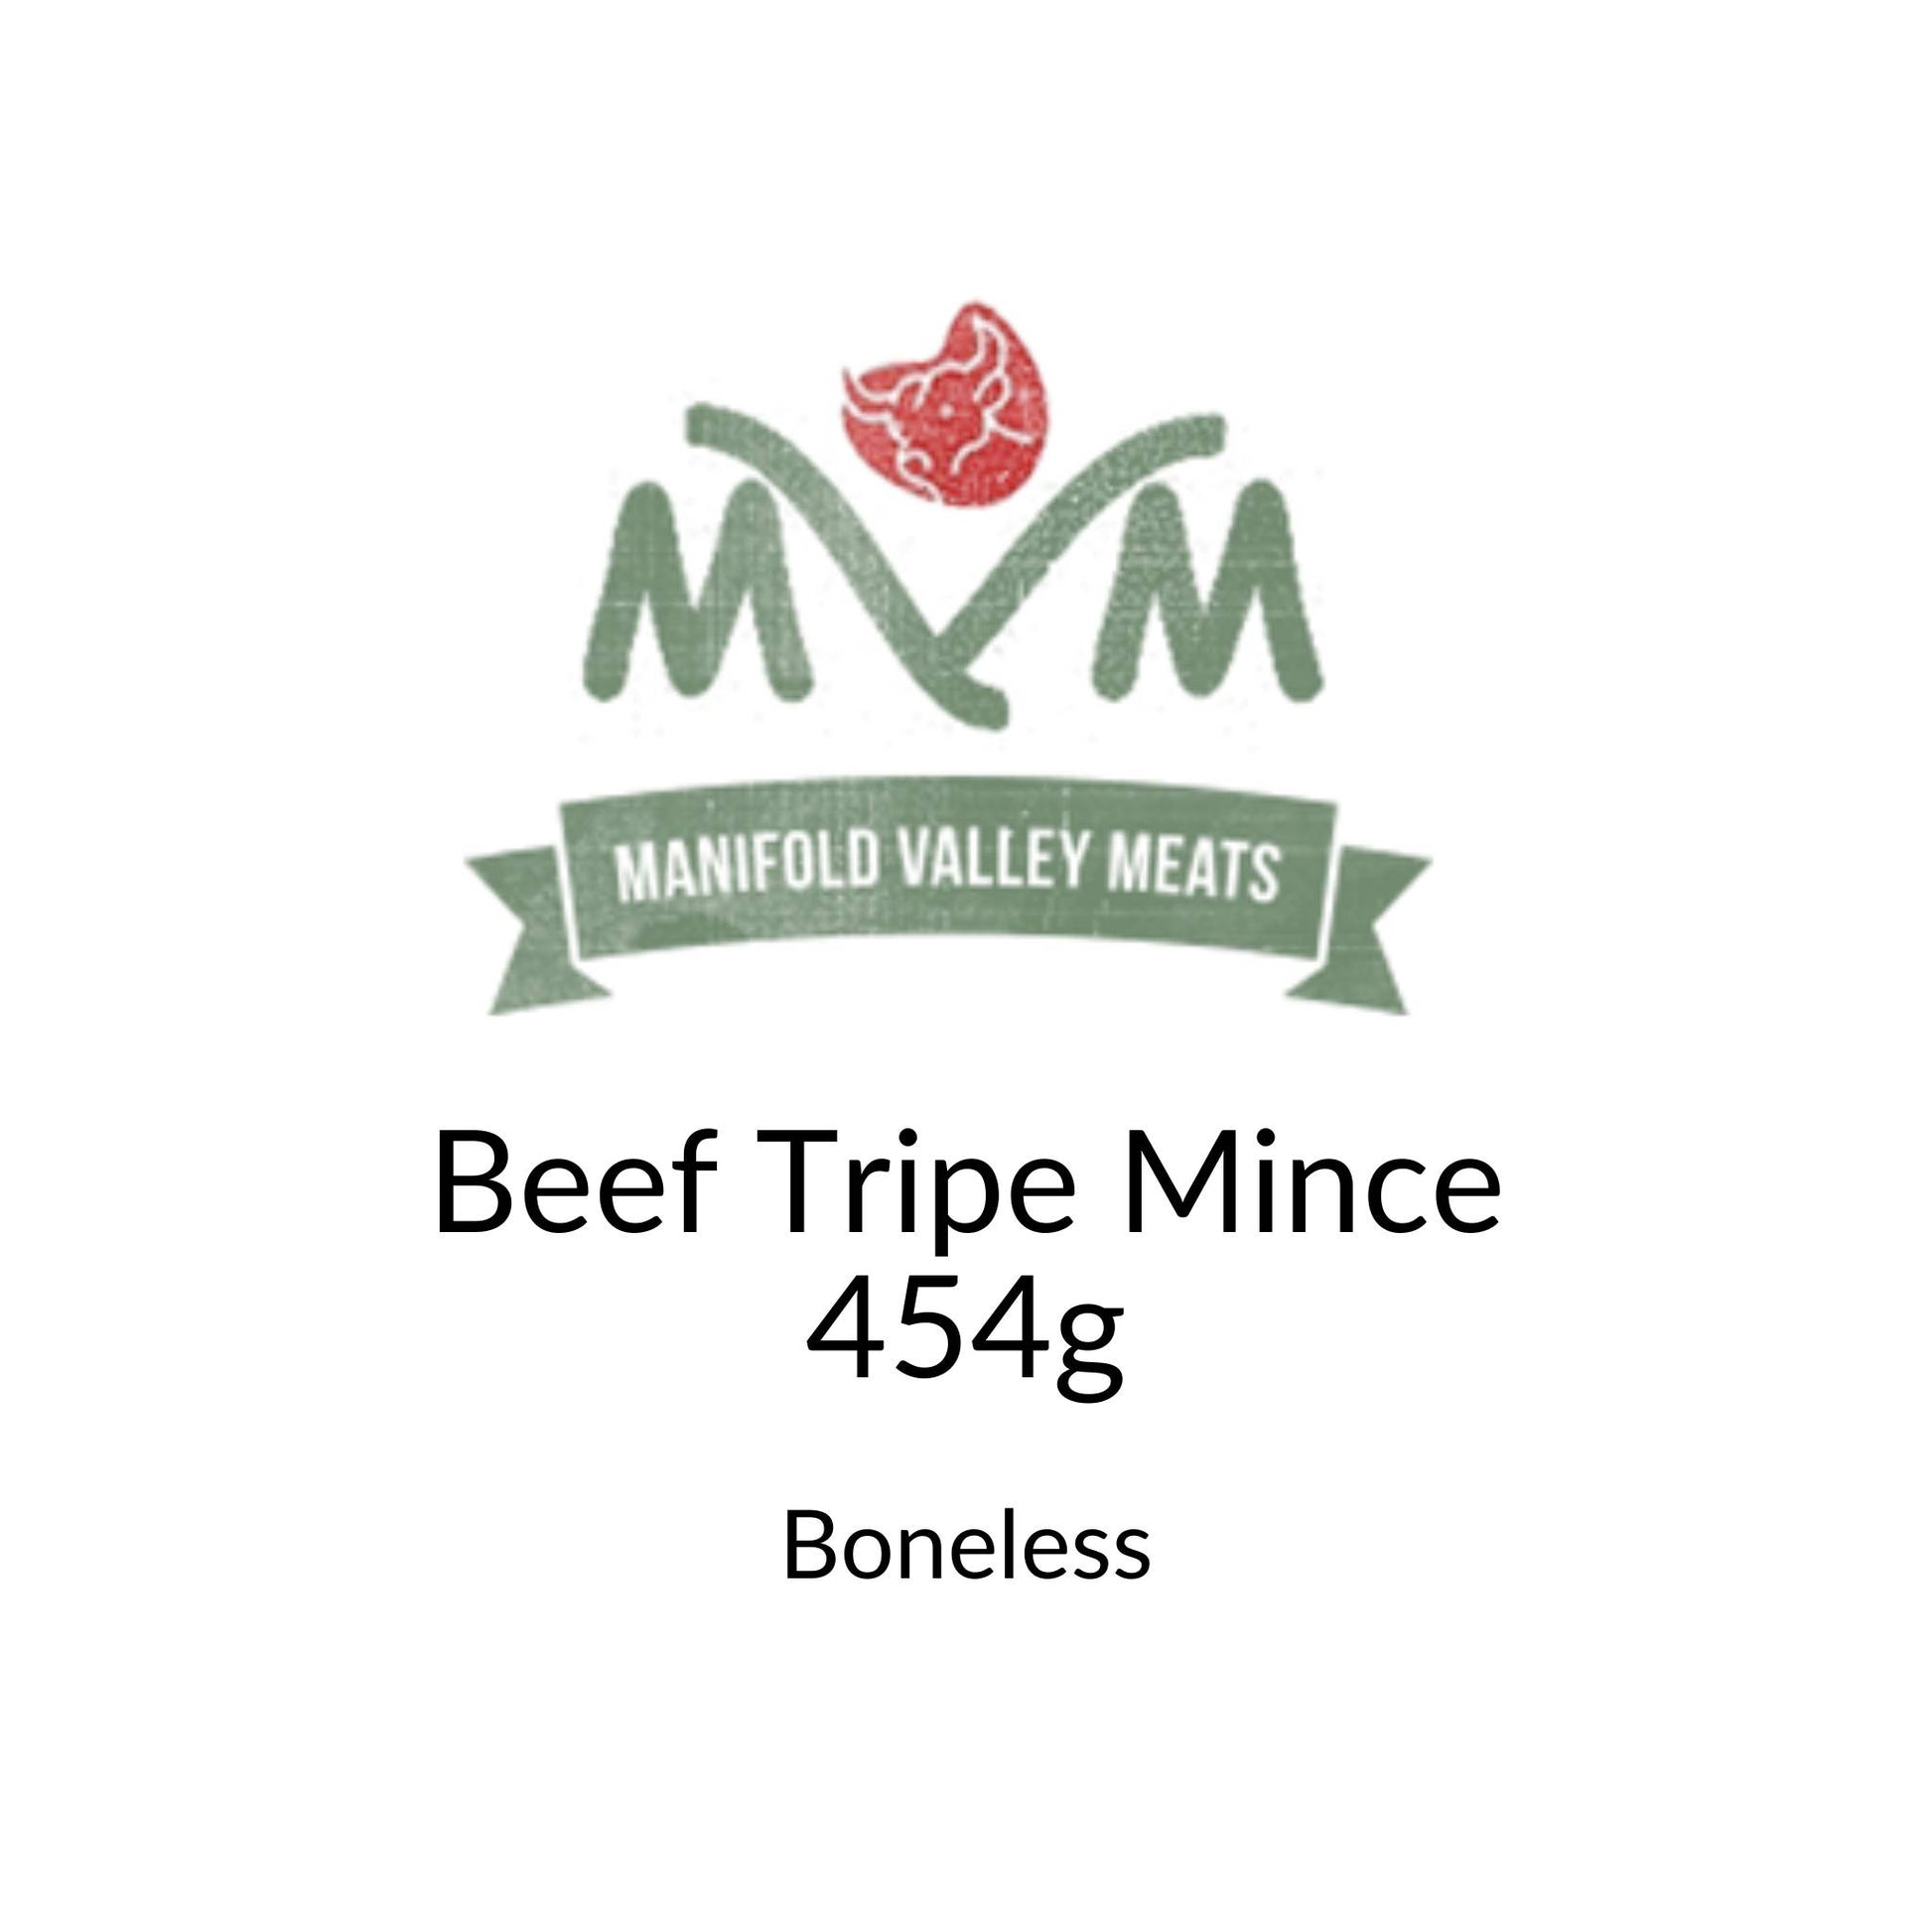 Manifold Valley Meats Beef Tripe Mince Raw Dog Food